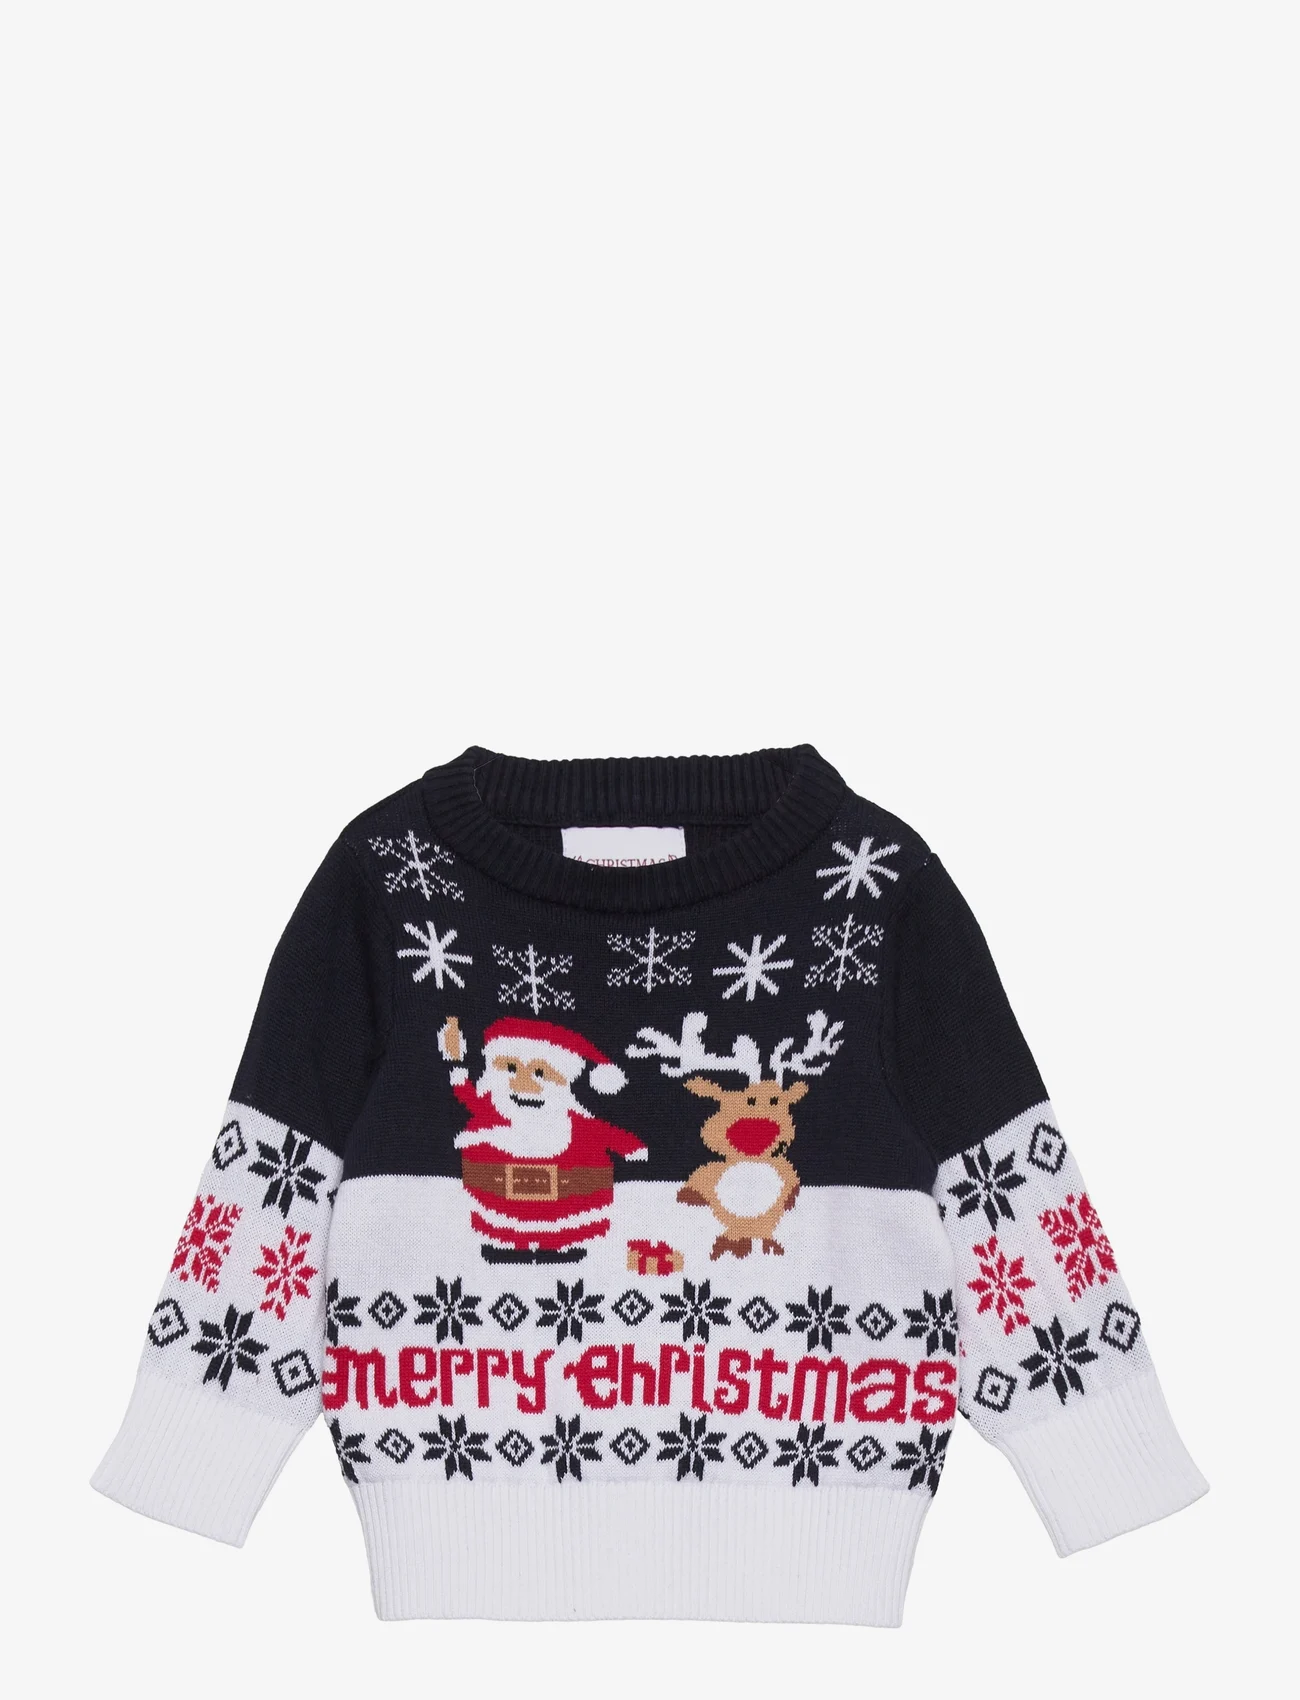 Christmas Sweats - The Ultimate Christmas Jumper - jumpers - navy - 0